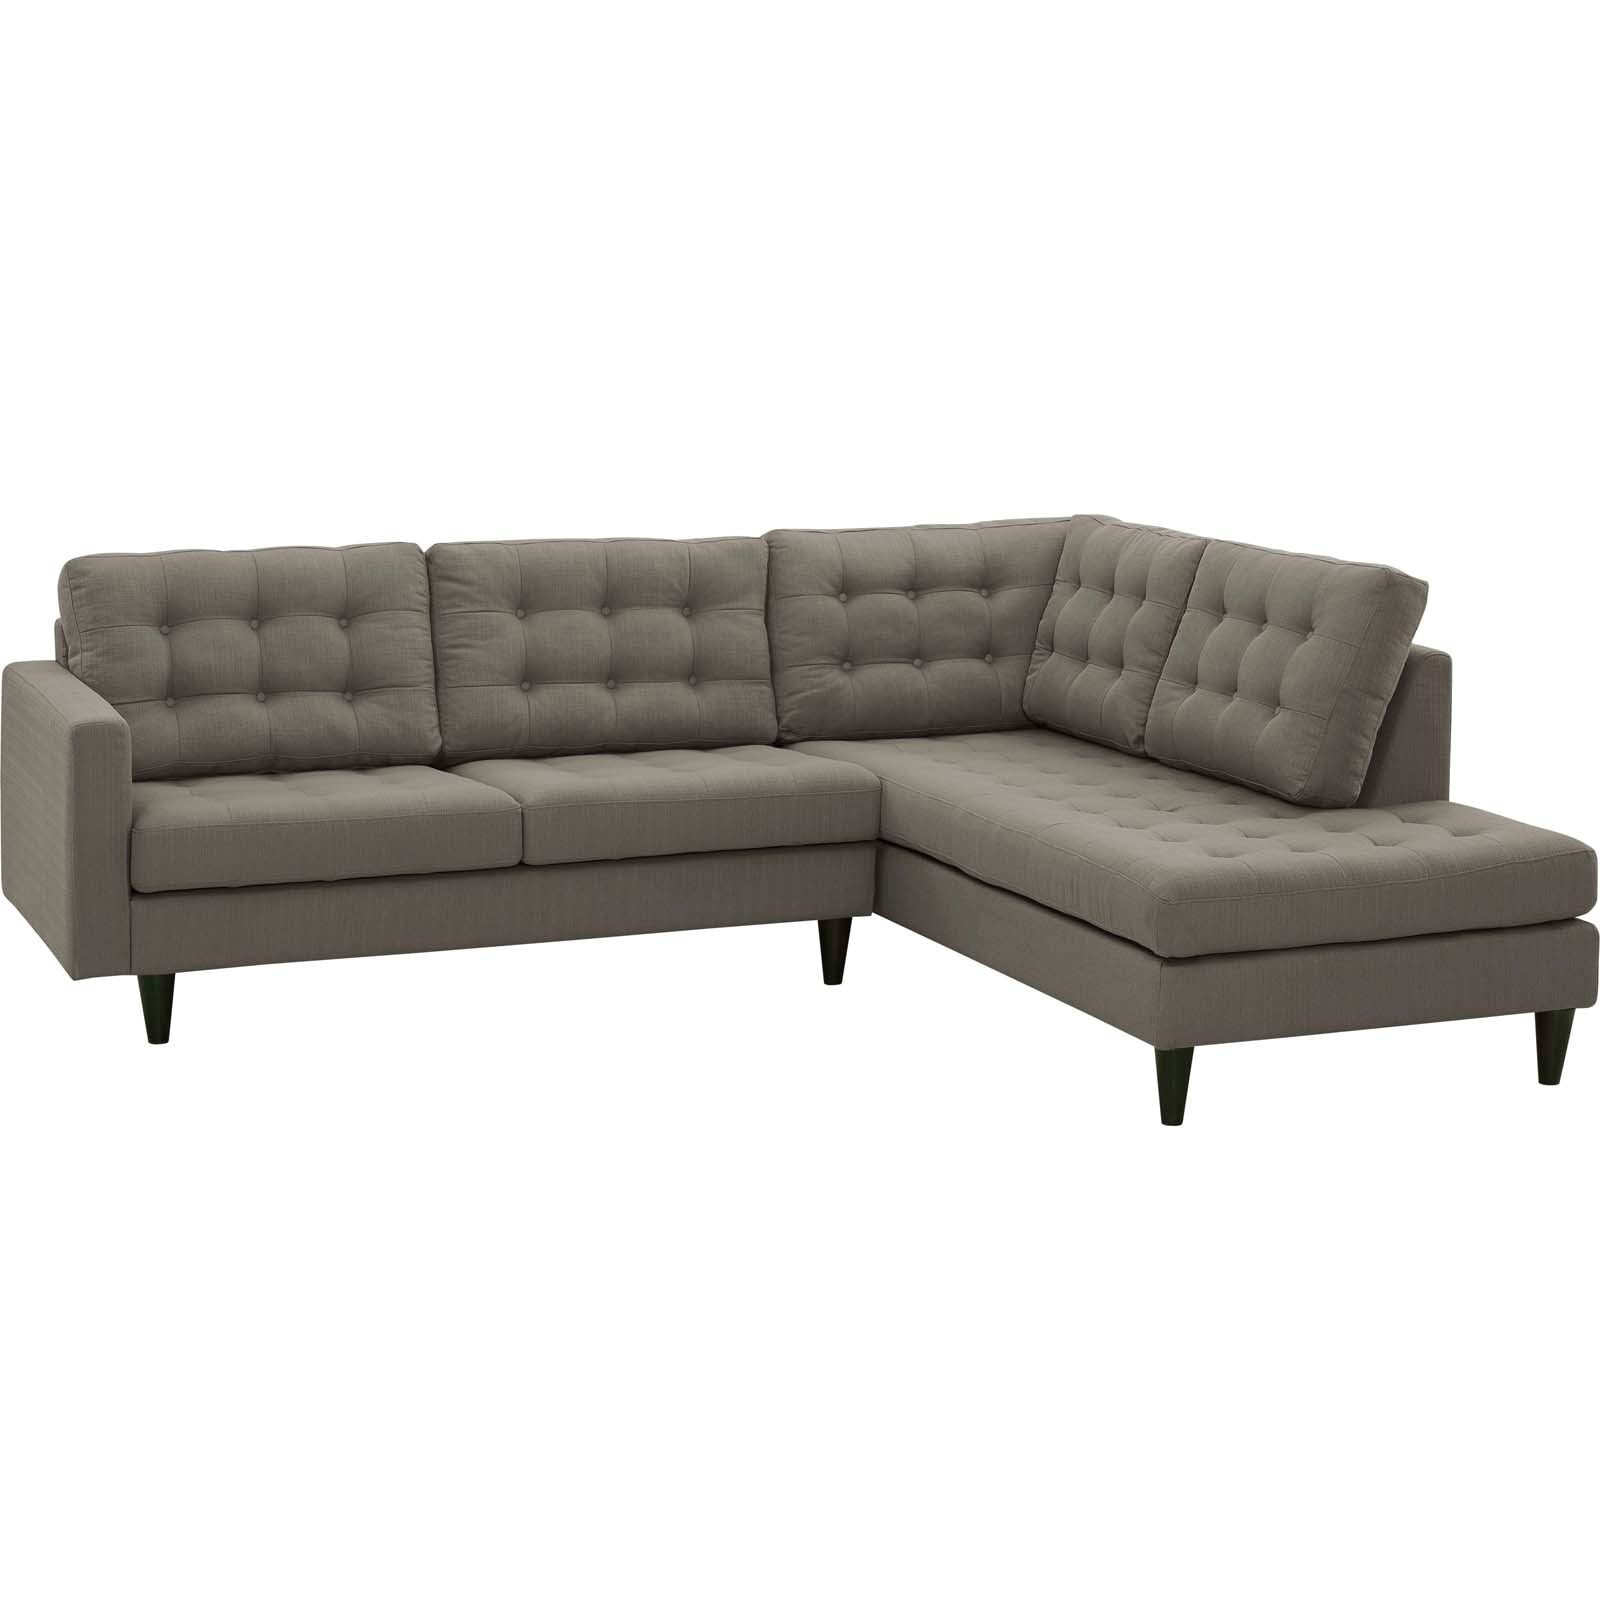 Modway Sectional Sofas - Empress Upholstered Fabric Right Extended Bumper Sectional Granite